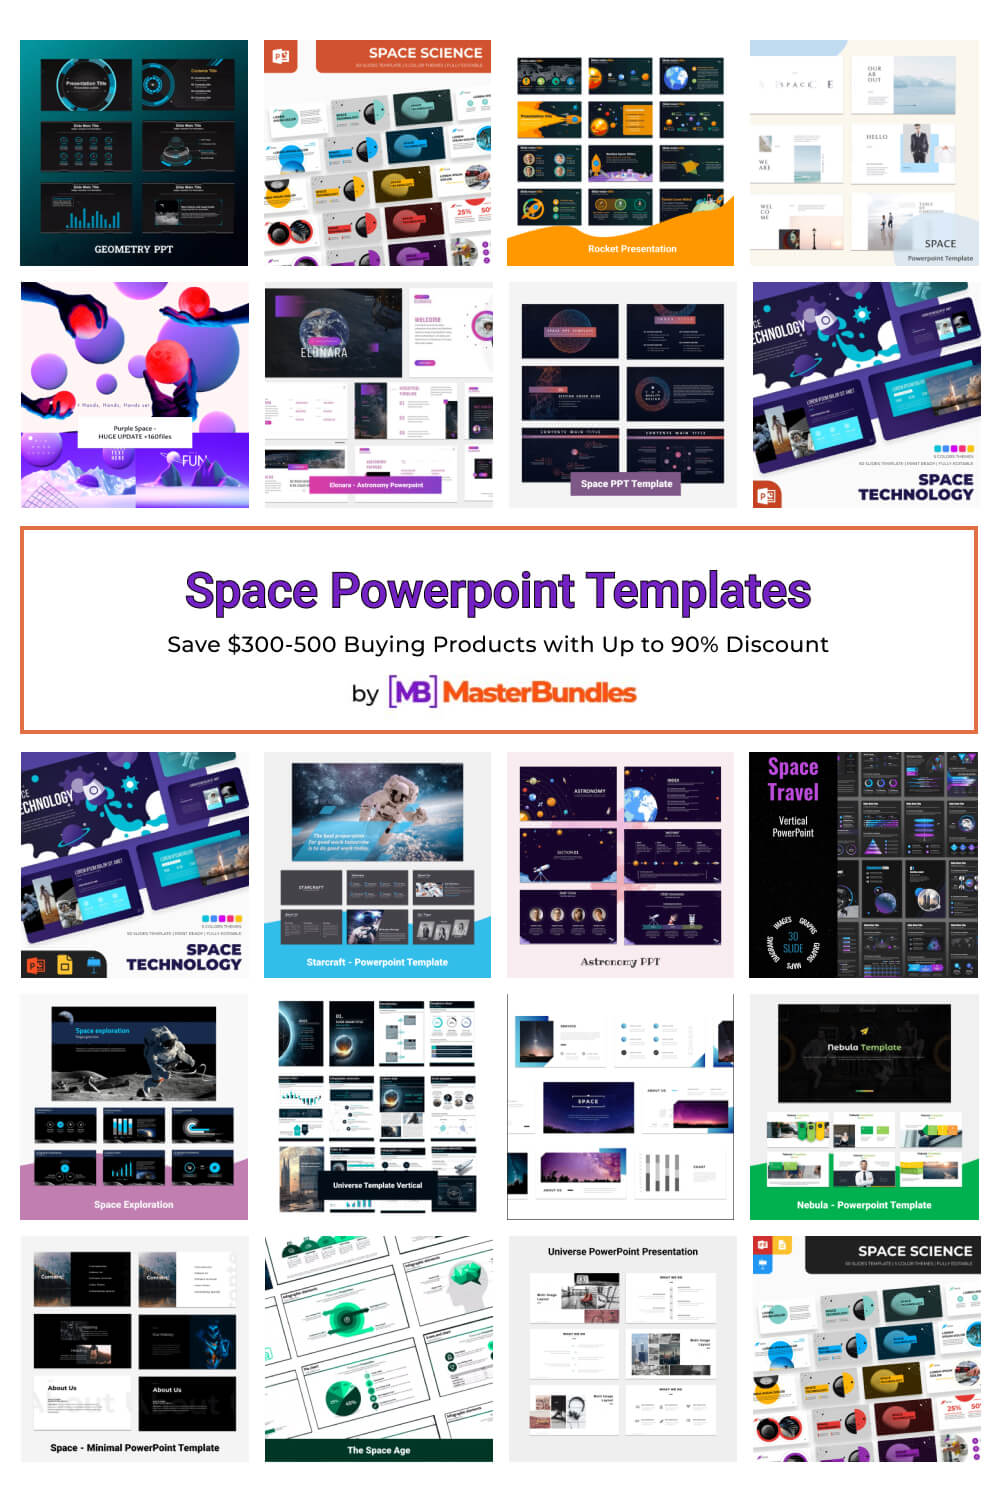 space powerpoint templates pinterest image.